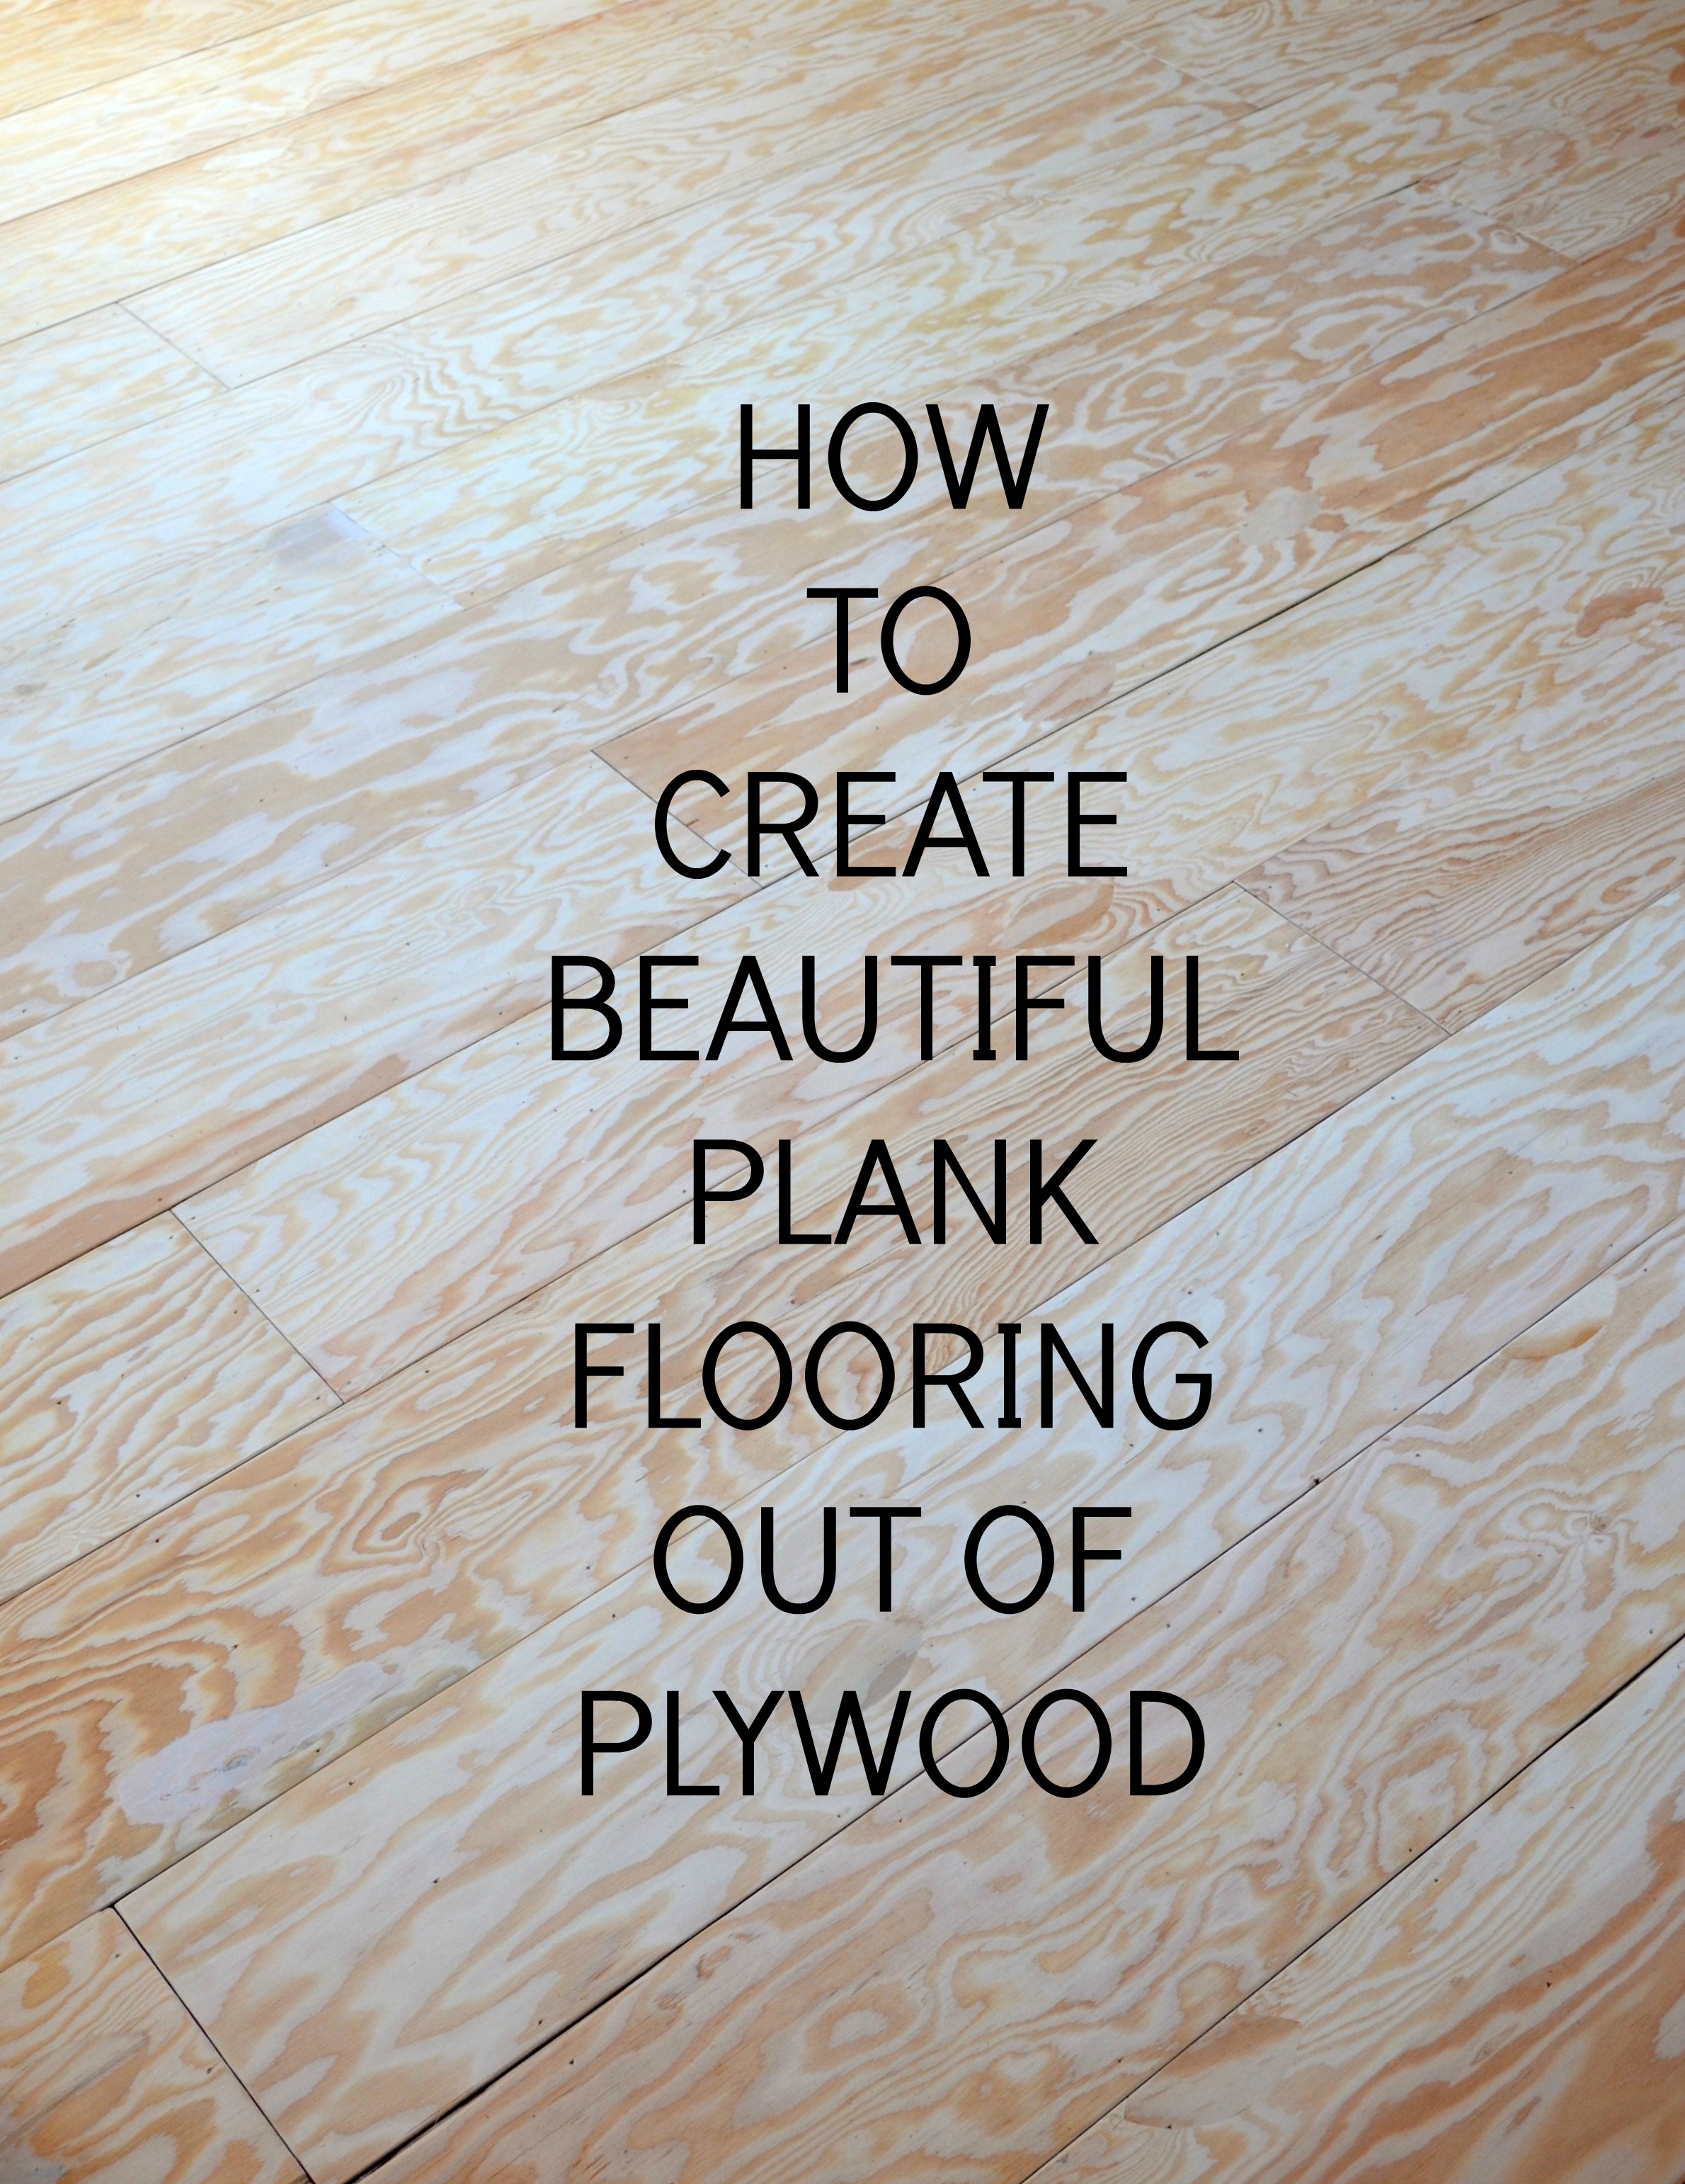 How To Create Beautiful Plank Flooring Out Of Plywood